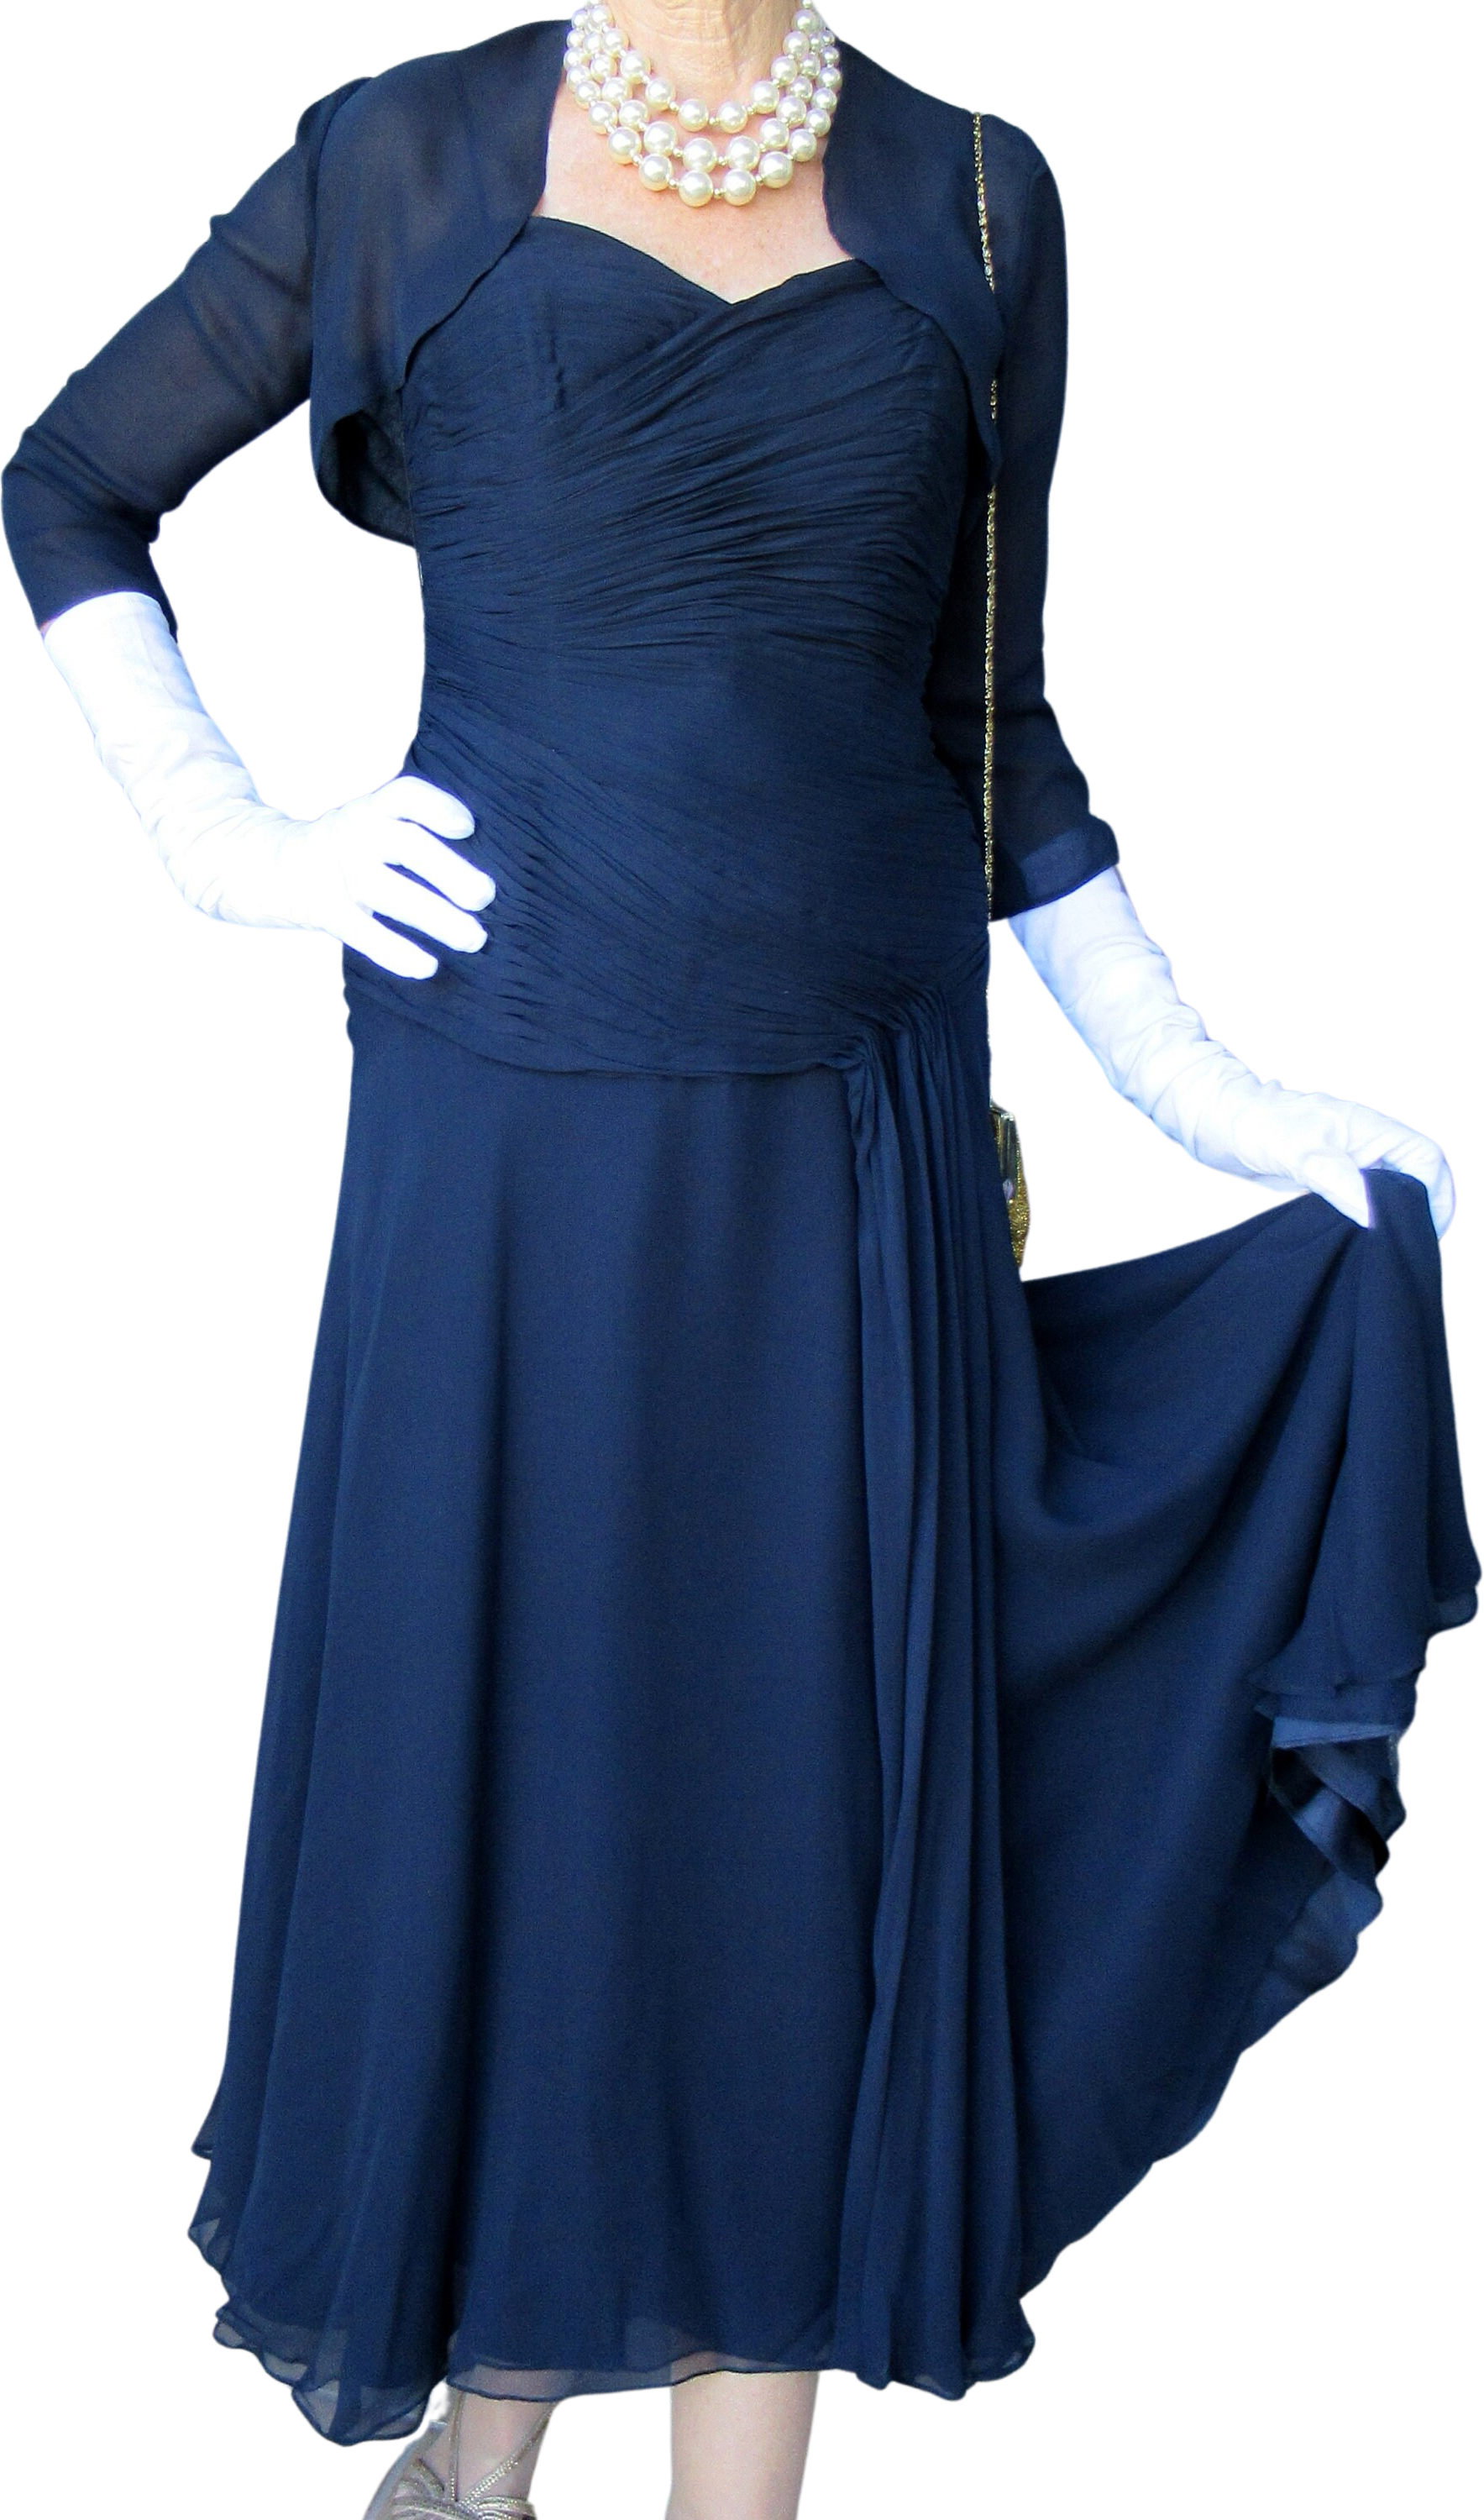 34 Inch Bust Strapless Dress / Formal, Padded Bra Top, Navy Blue CM  Couture, Spaghetti Strap, Back Zipper, Full Sheer Skirt W/ Front Panel -   Canada